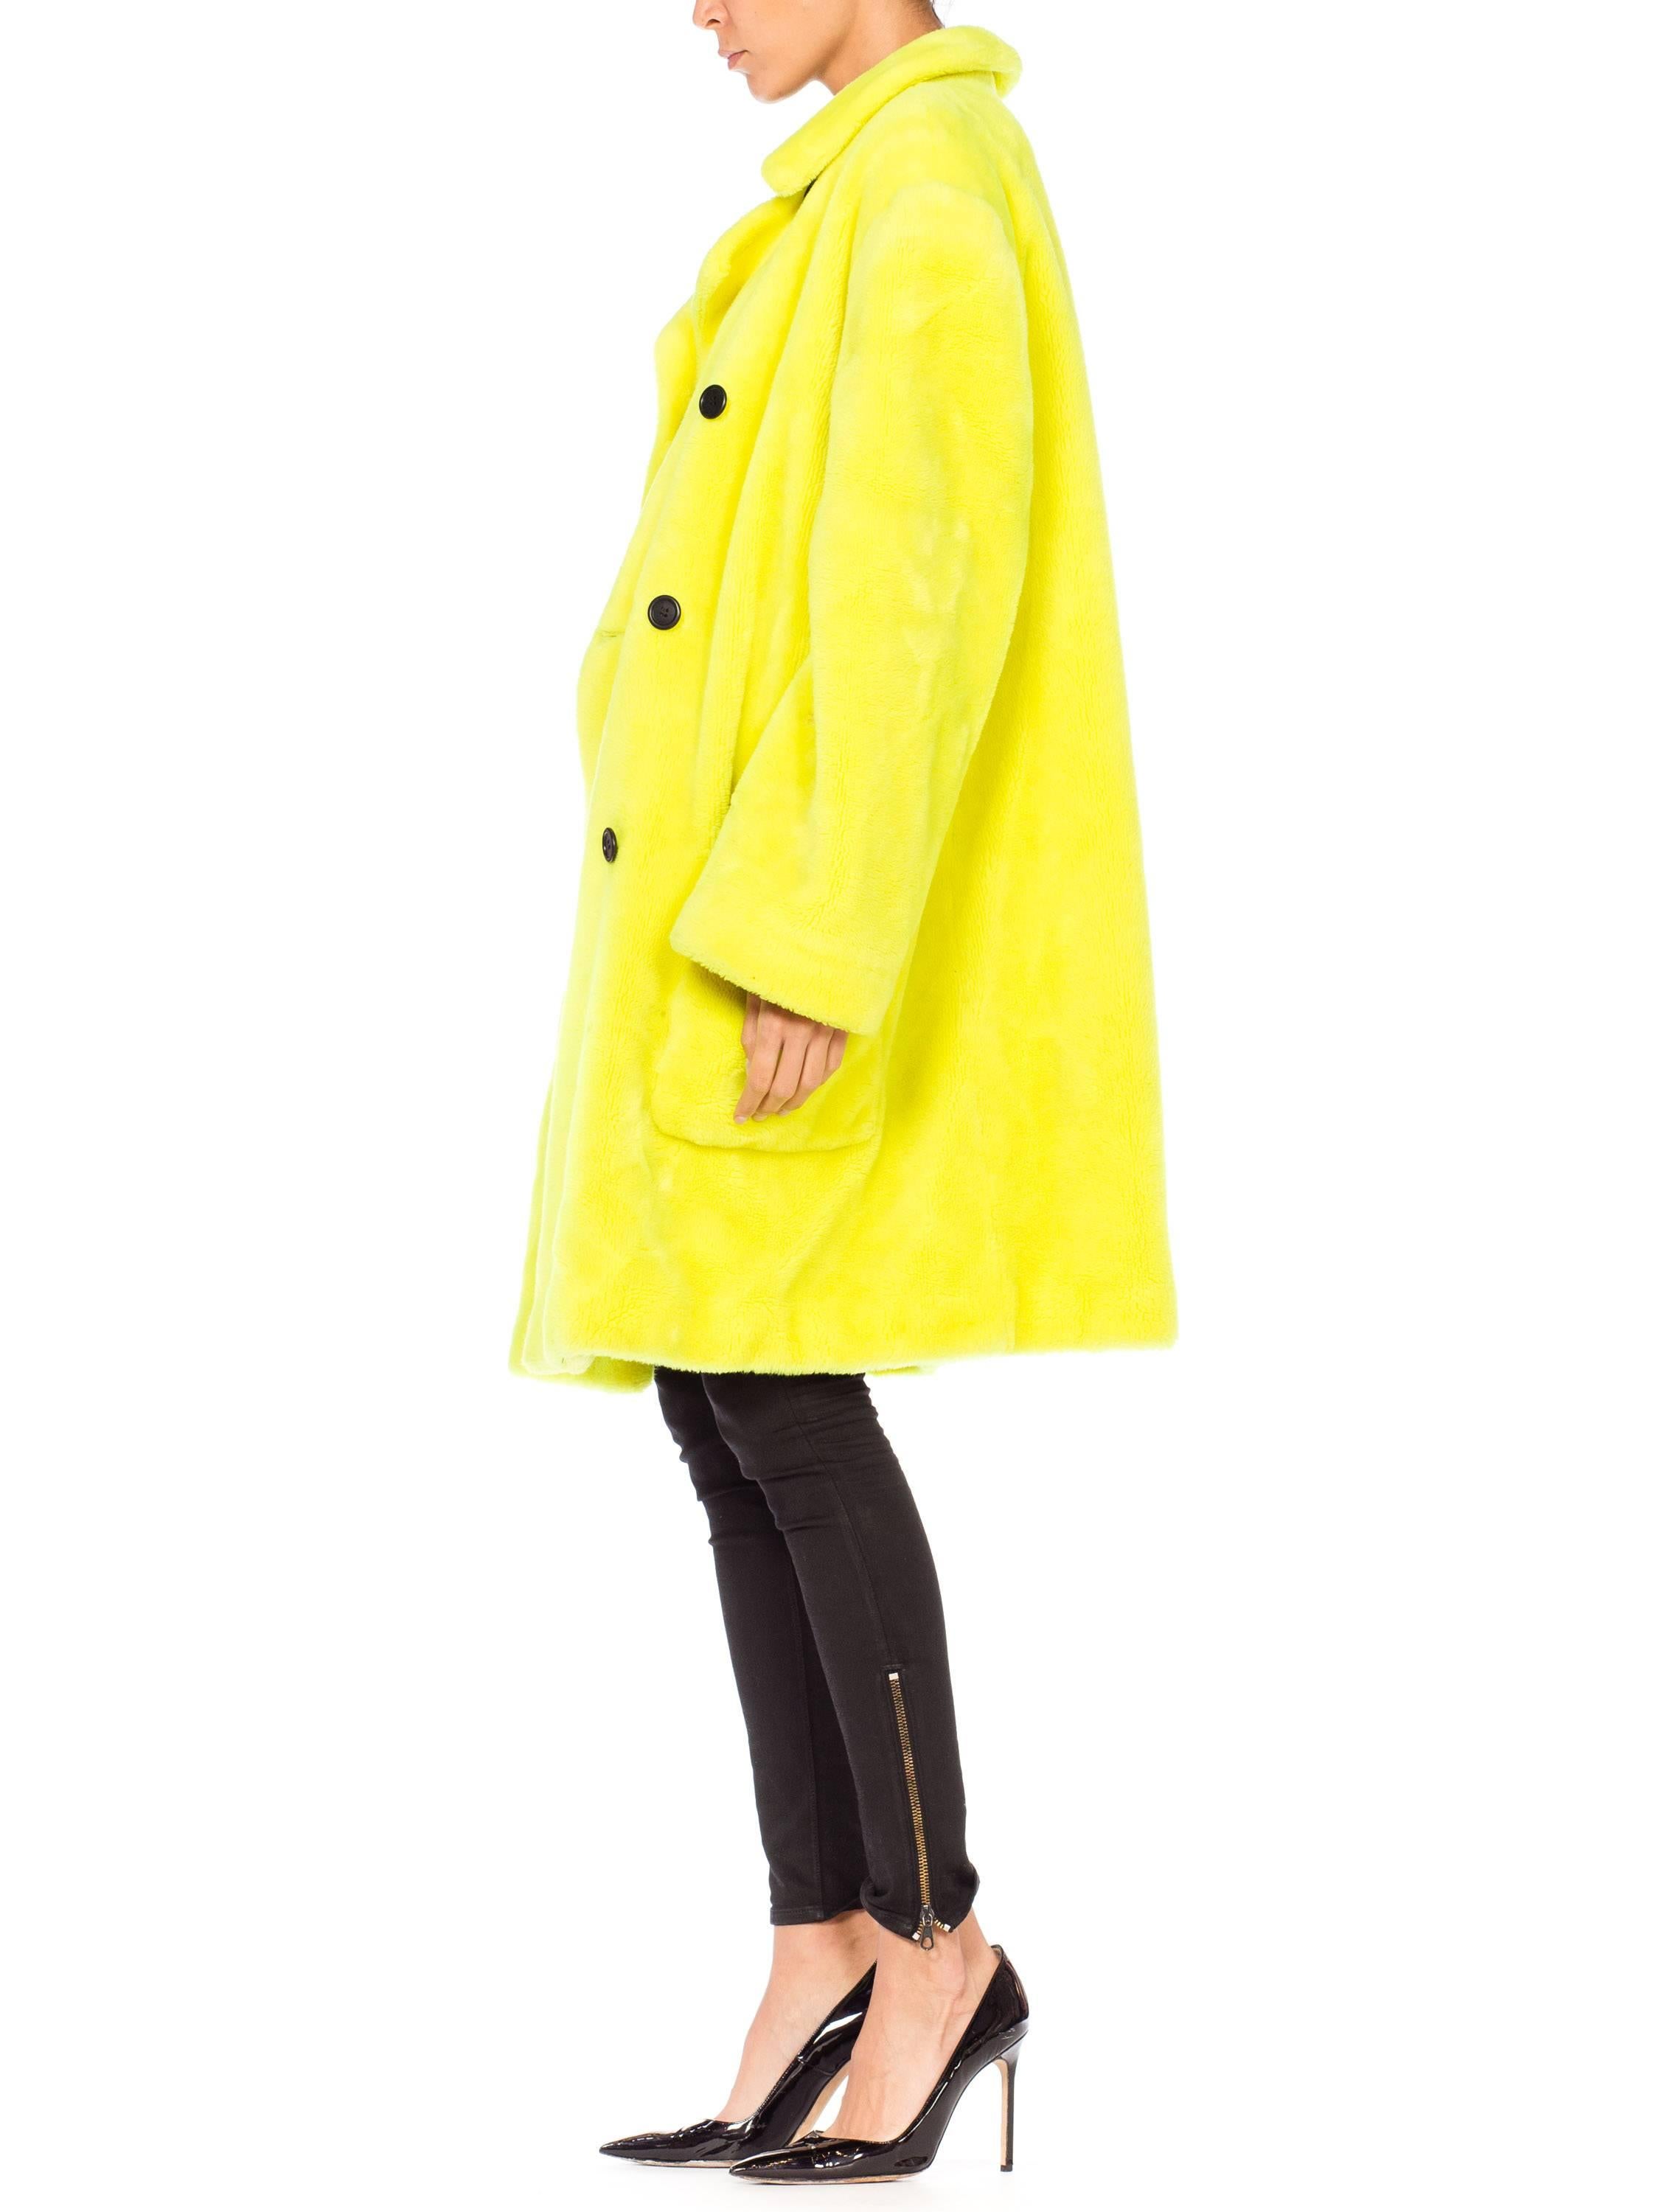 Stephen Sprouse Oversized Highlighter Yellow Faux Fur Coat, 1980s  9